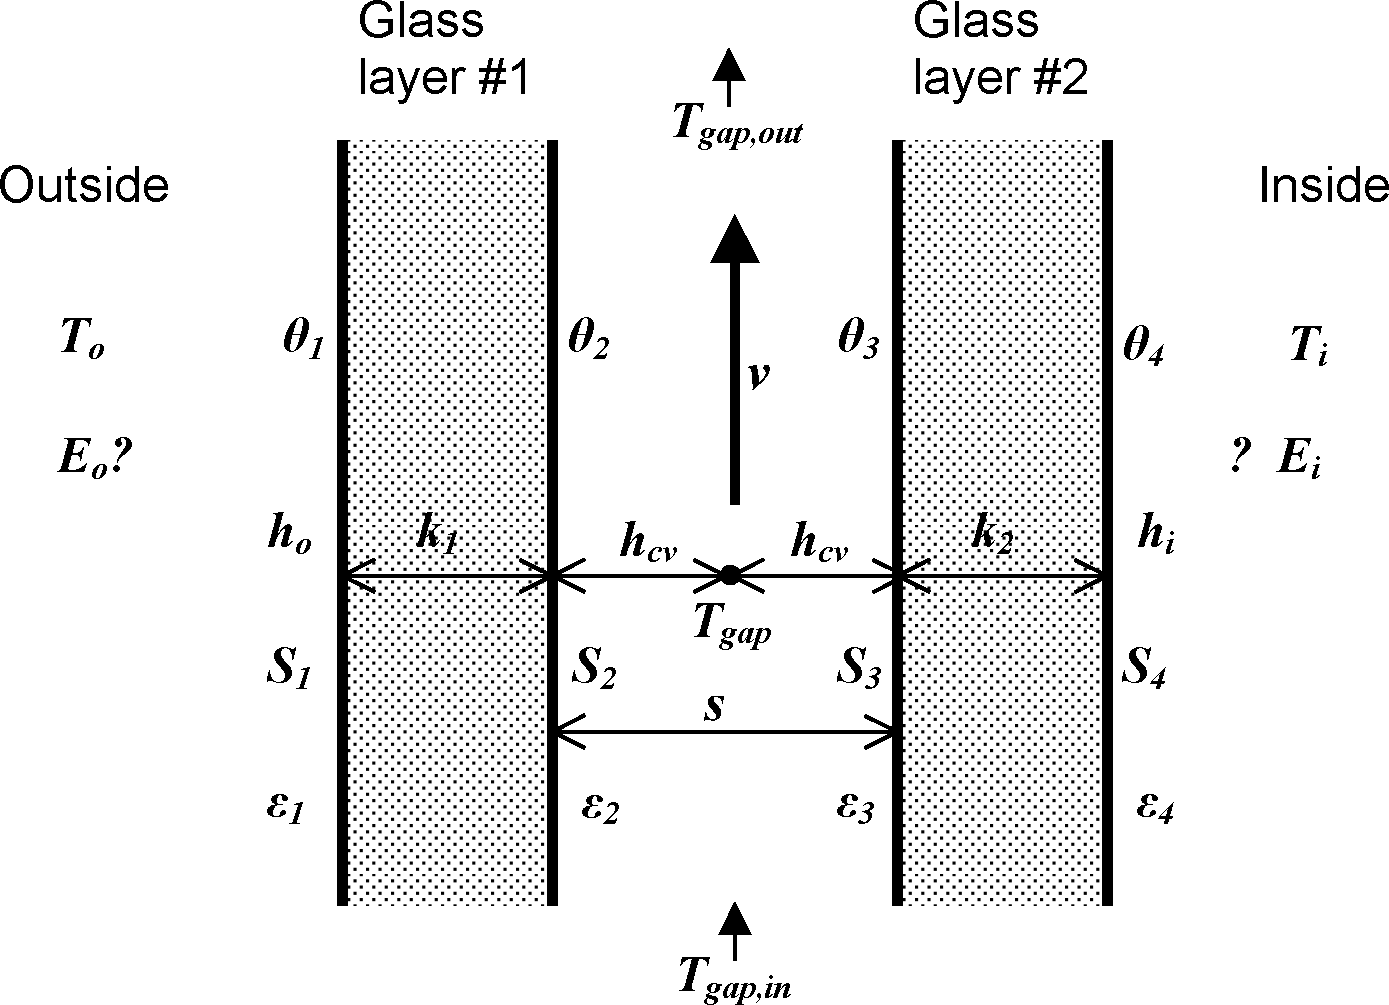 Glazing system with forced airflow between two glass layers showing variables used in the heat balance equations. [fig:glazing-system-with-forced-airflow-between]